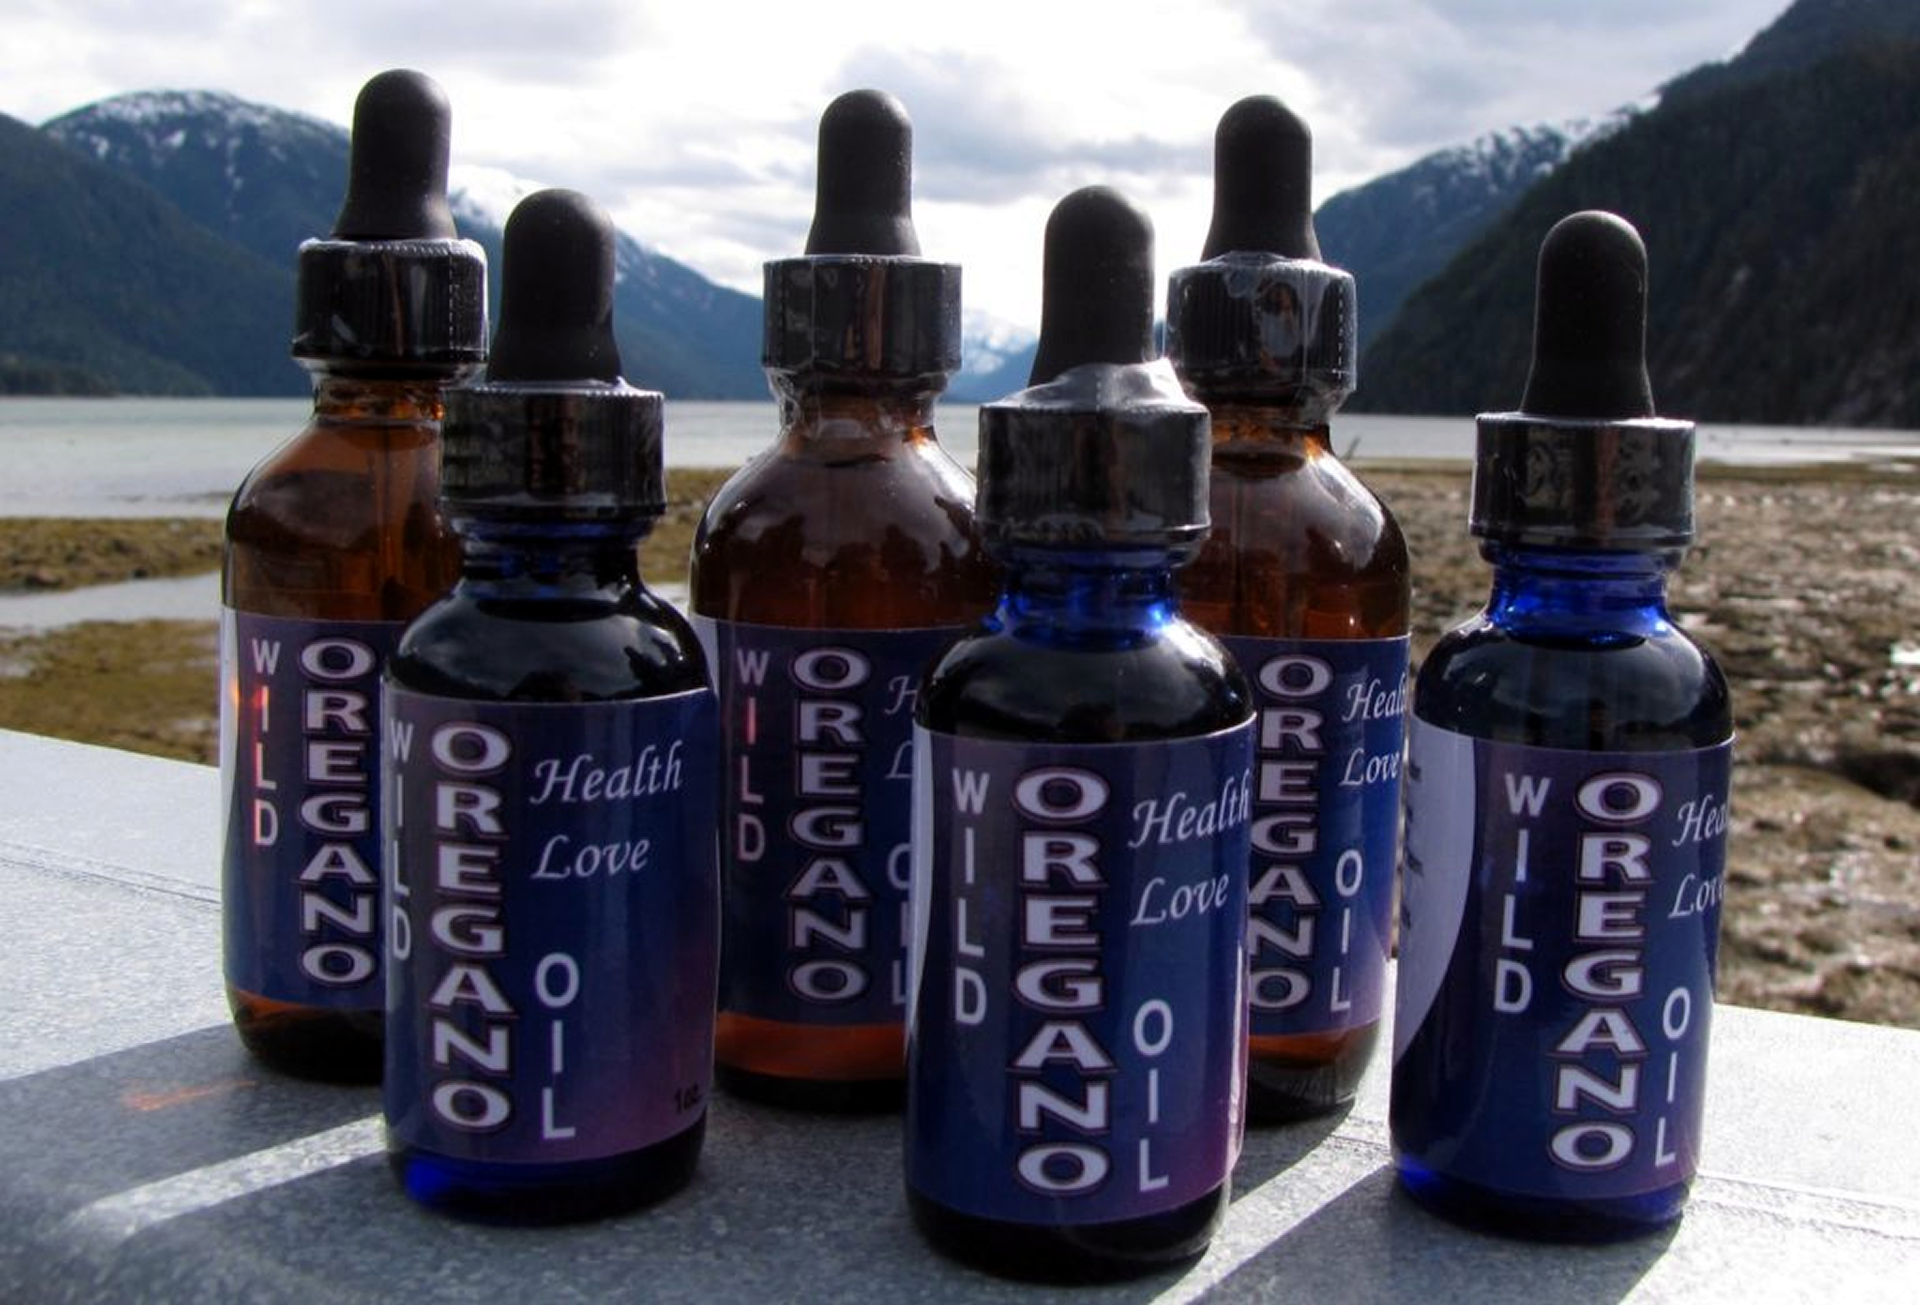 several bottles of oregano oil are lined up on a table